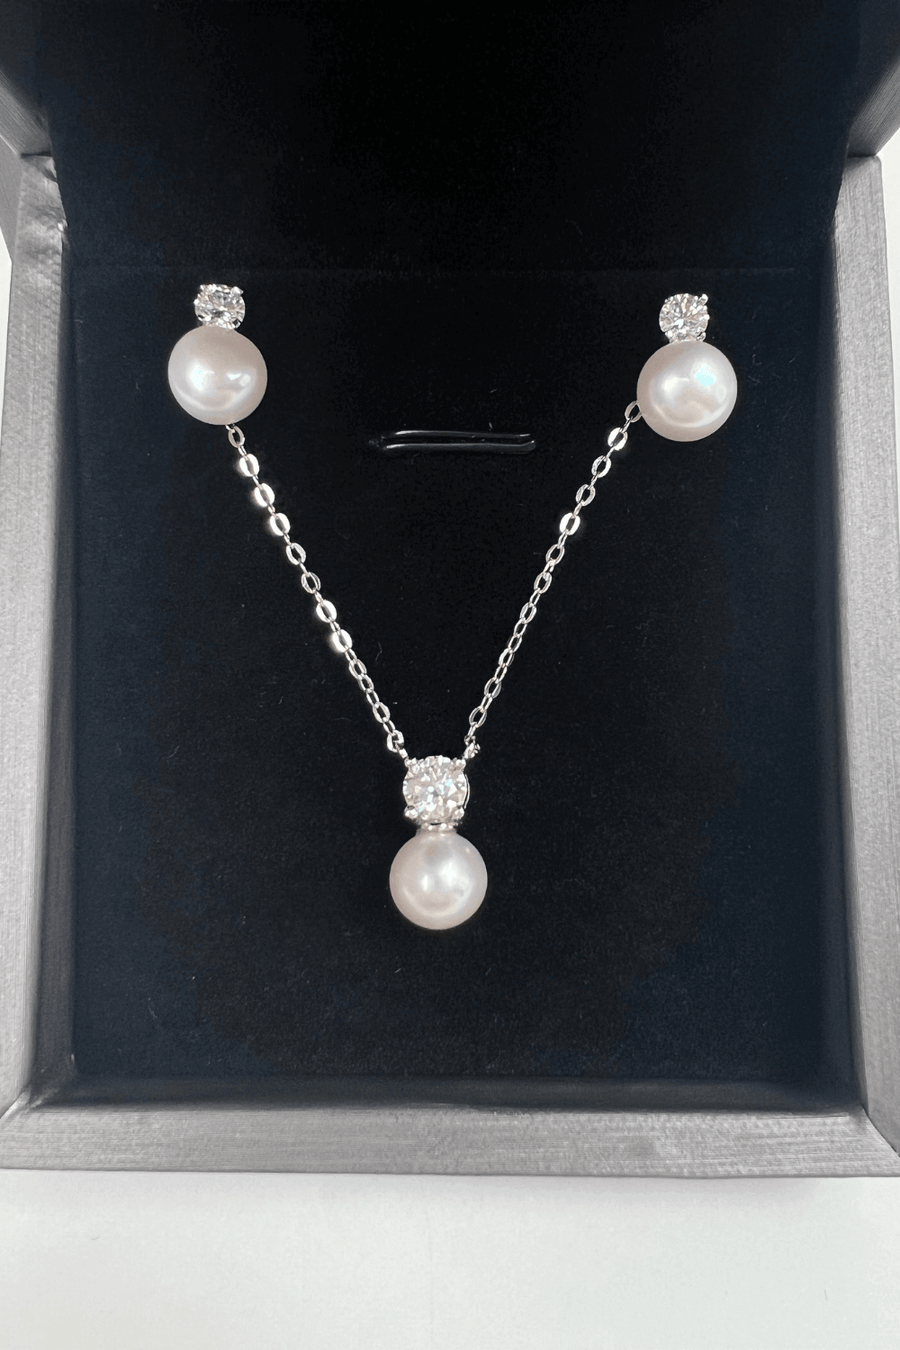 1# BEST Diamond Pearl Necklace, Earrings Jewelry Bundle Set Gift for Women | #1 Best Most Top Trendy Trending Pearl Diamond Necklace, Earrings Jewelry Gift for Women, Mother, Wife, Daughter, Ladies | MASON New York